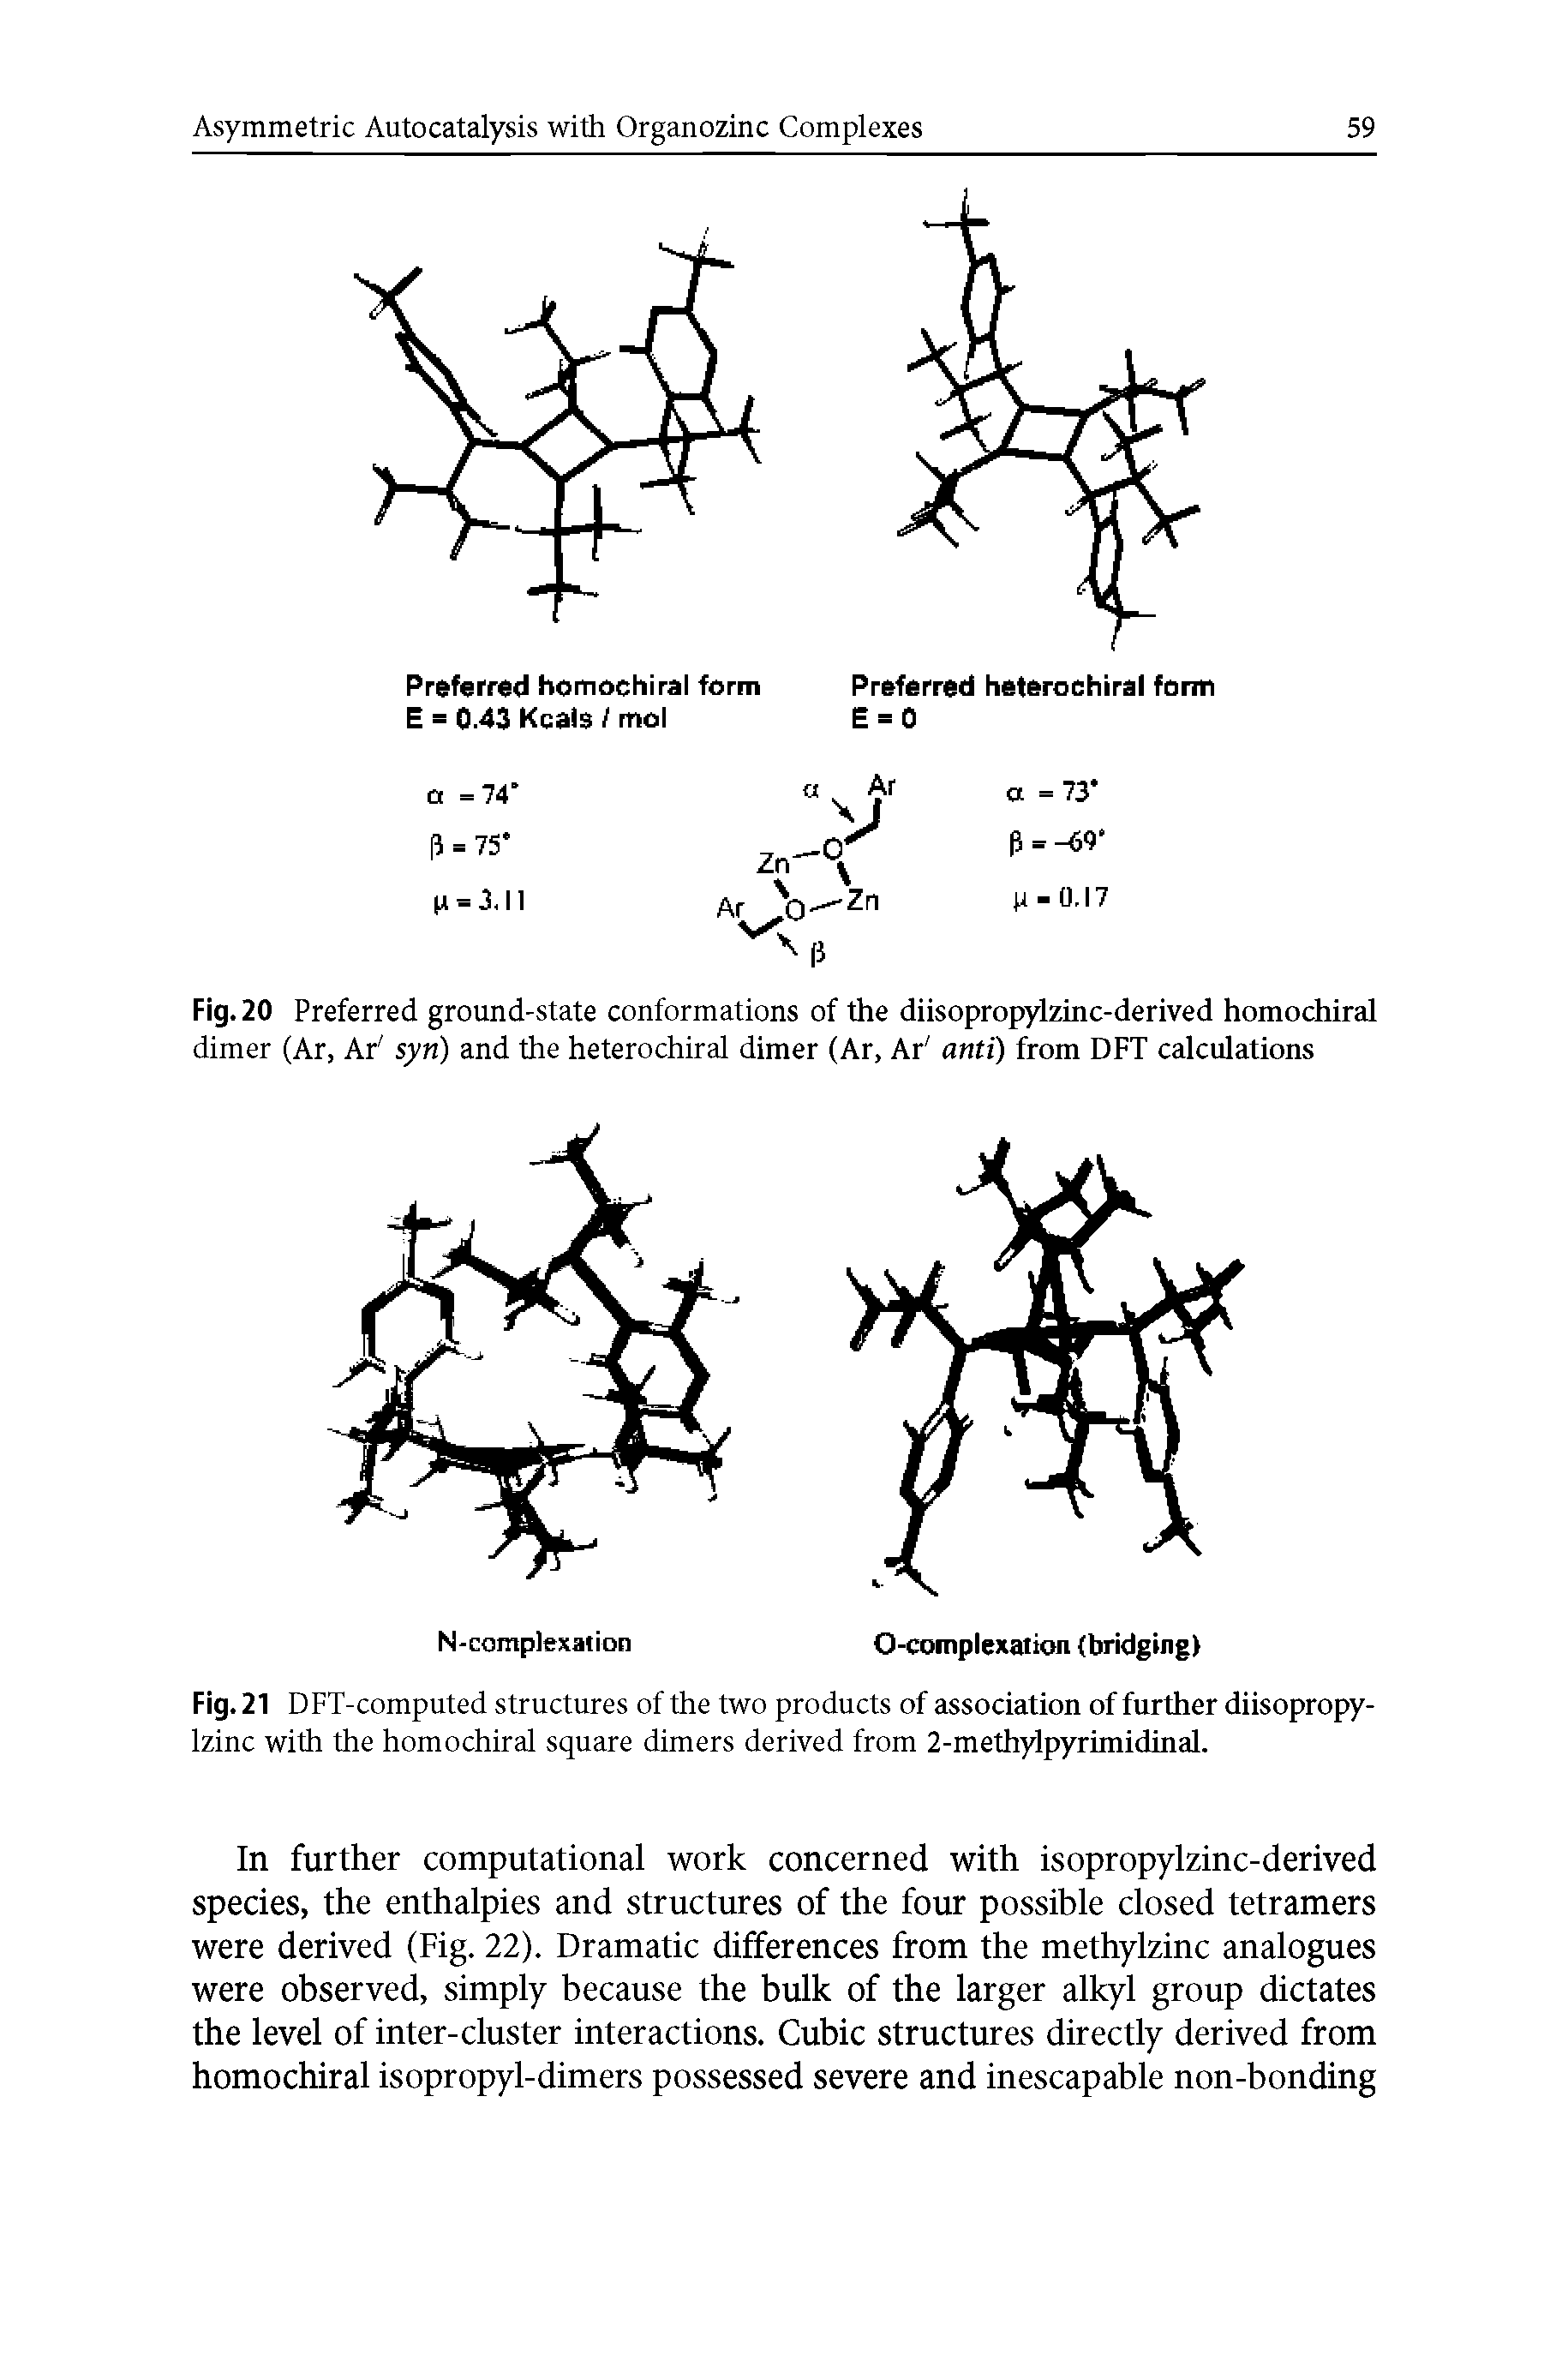 Fig. 21 DFT-computed structures of the two products of association of further diisopropy-lzinc with the homoehiral square dimers derived from 2-methylpyrimidinal.